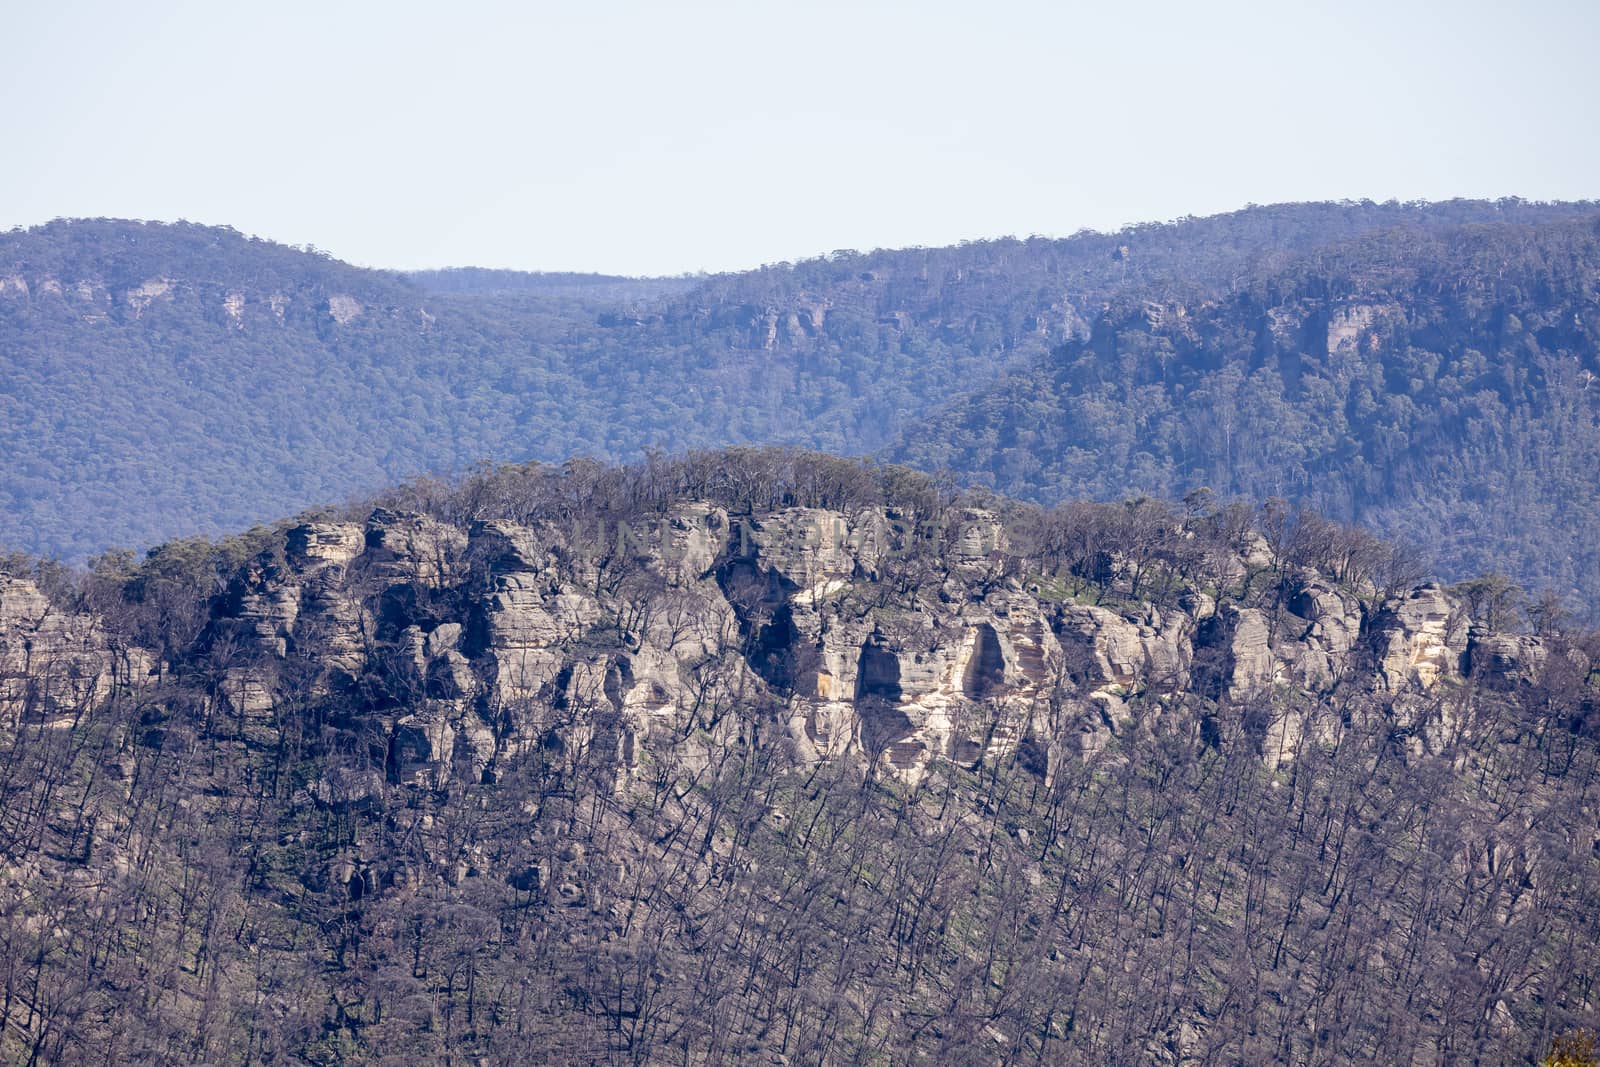 Forest regeneration after bushfires in The Blue Mountains in New South Wales in Australia